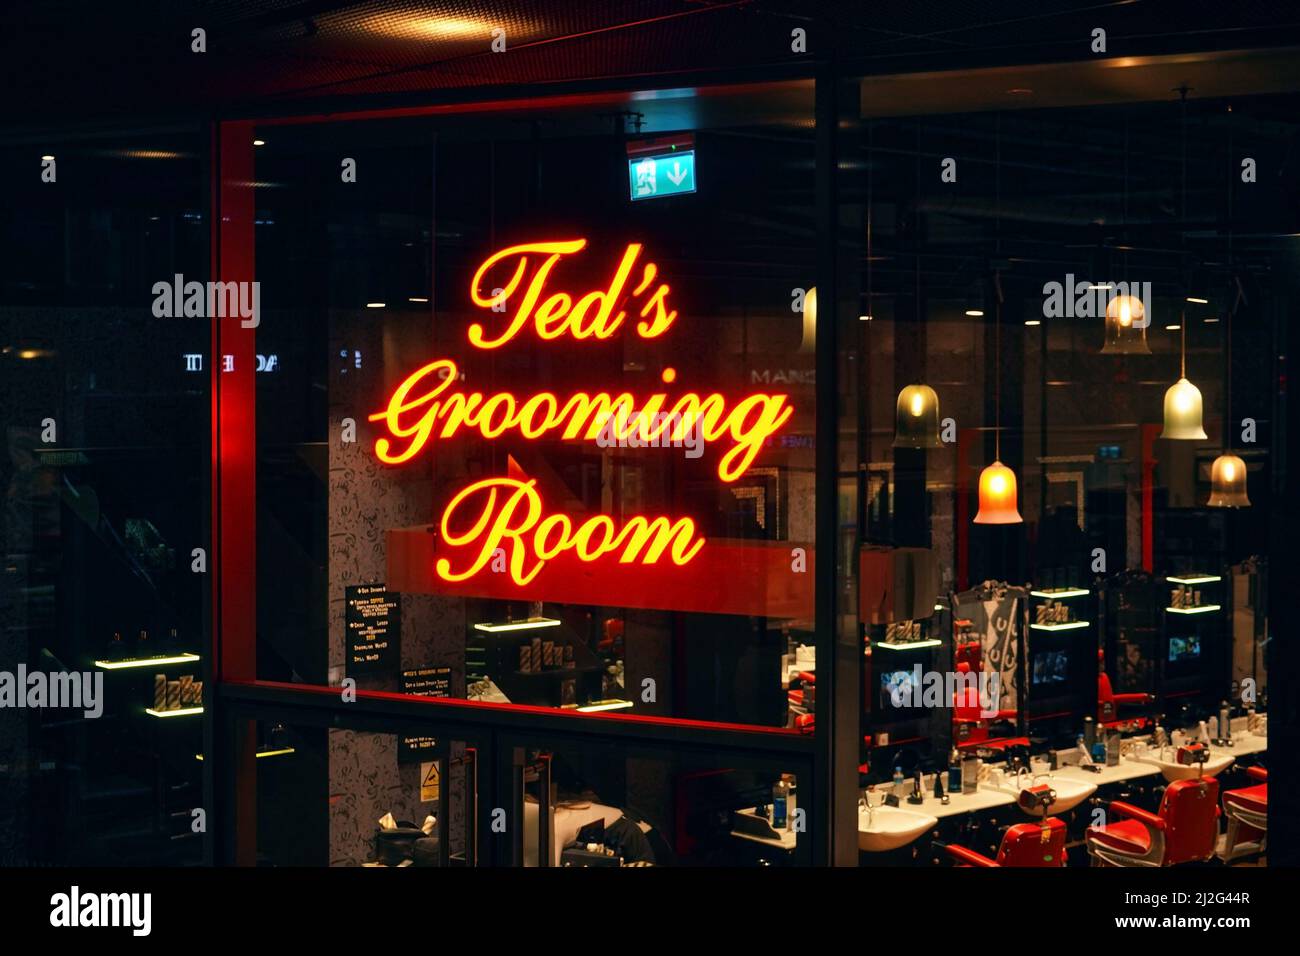 London, United Kingdom - February 01, 2019: Yellow neon script text logo on Ted's Grooming Room - subsidiary of Ted Baker - barber shop at one of thei Stock Photo